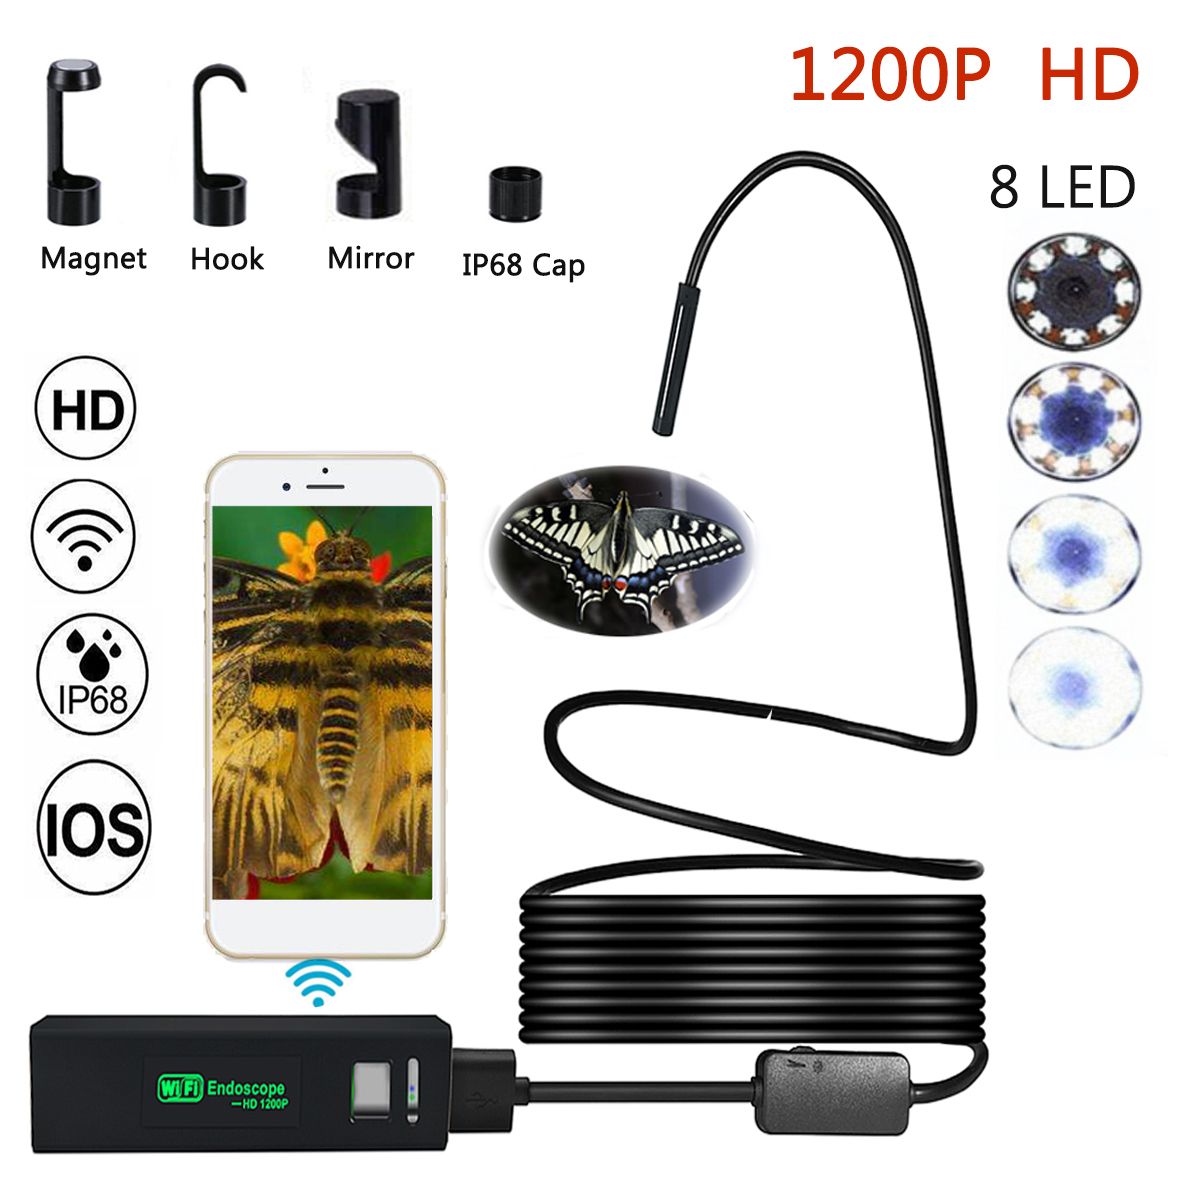 1200P-HD-Wifi-8LED-Borescope-Inspection-Camera-IP68-For-Android-iPhone-1469901